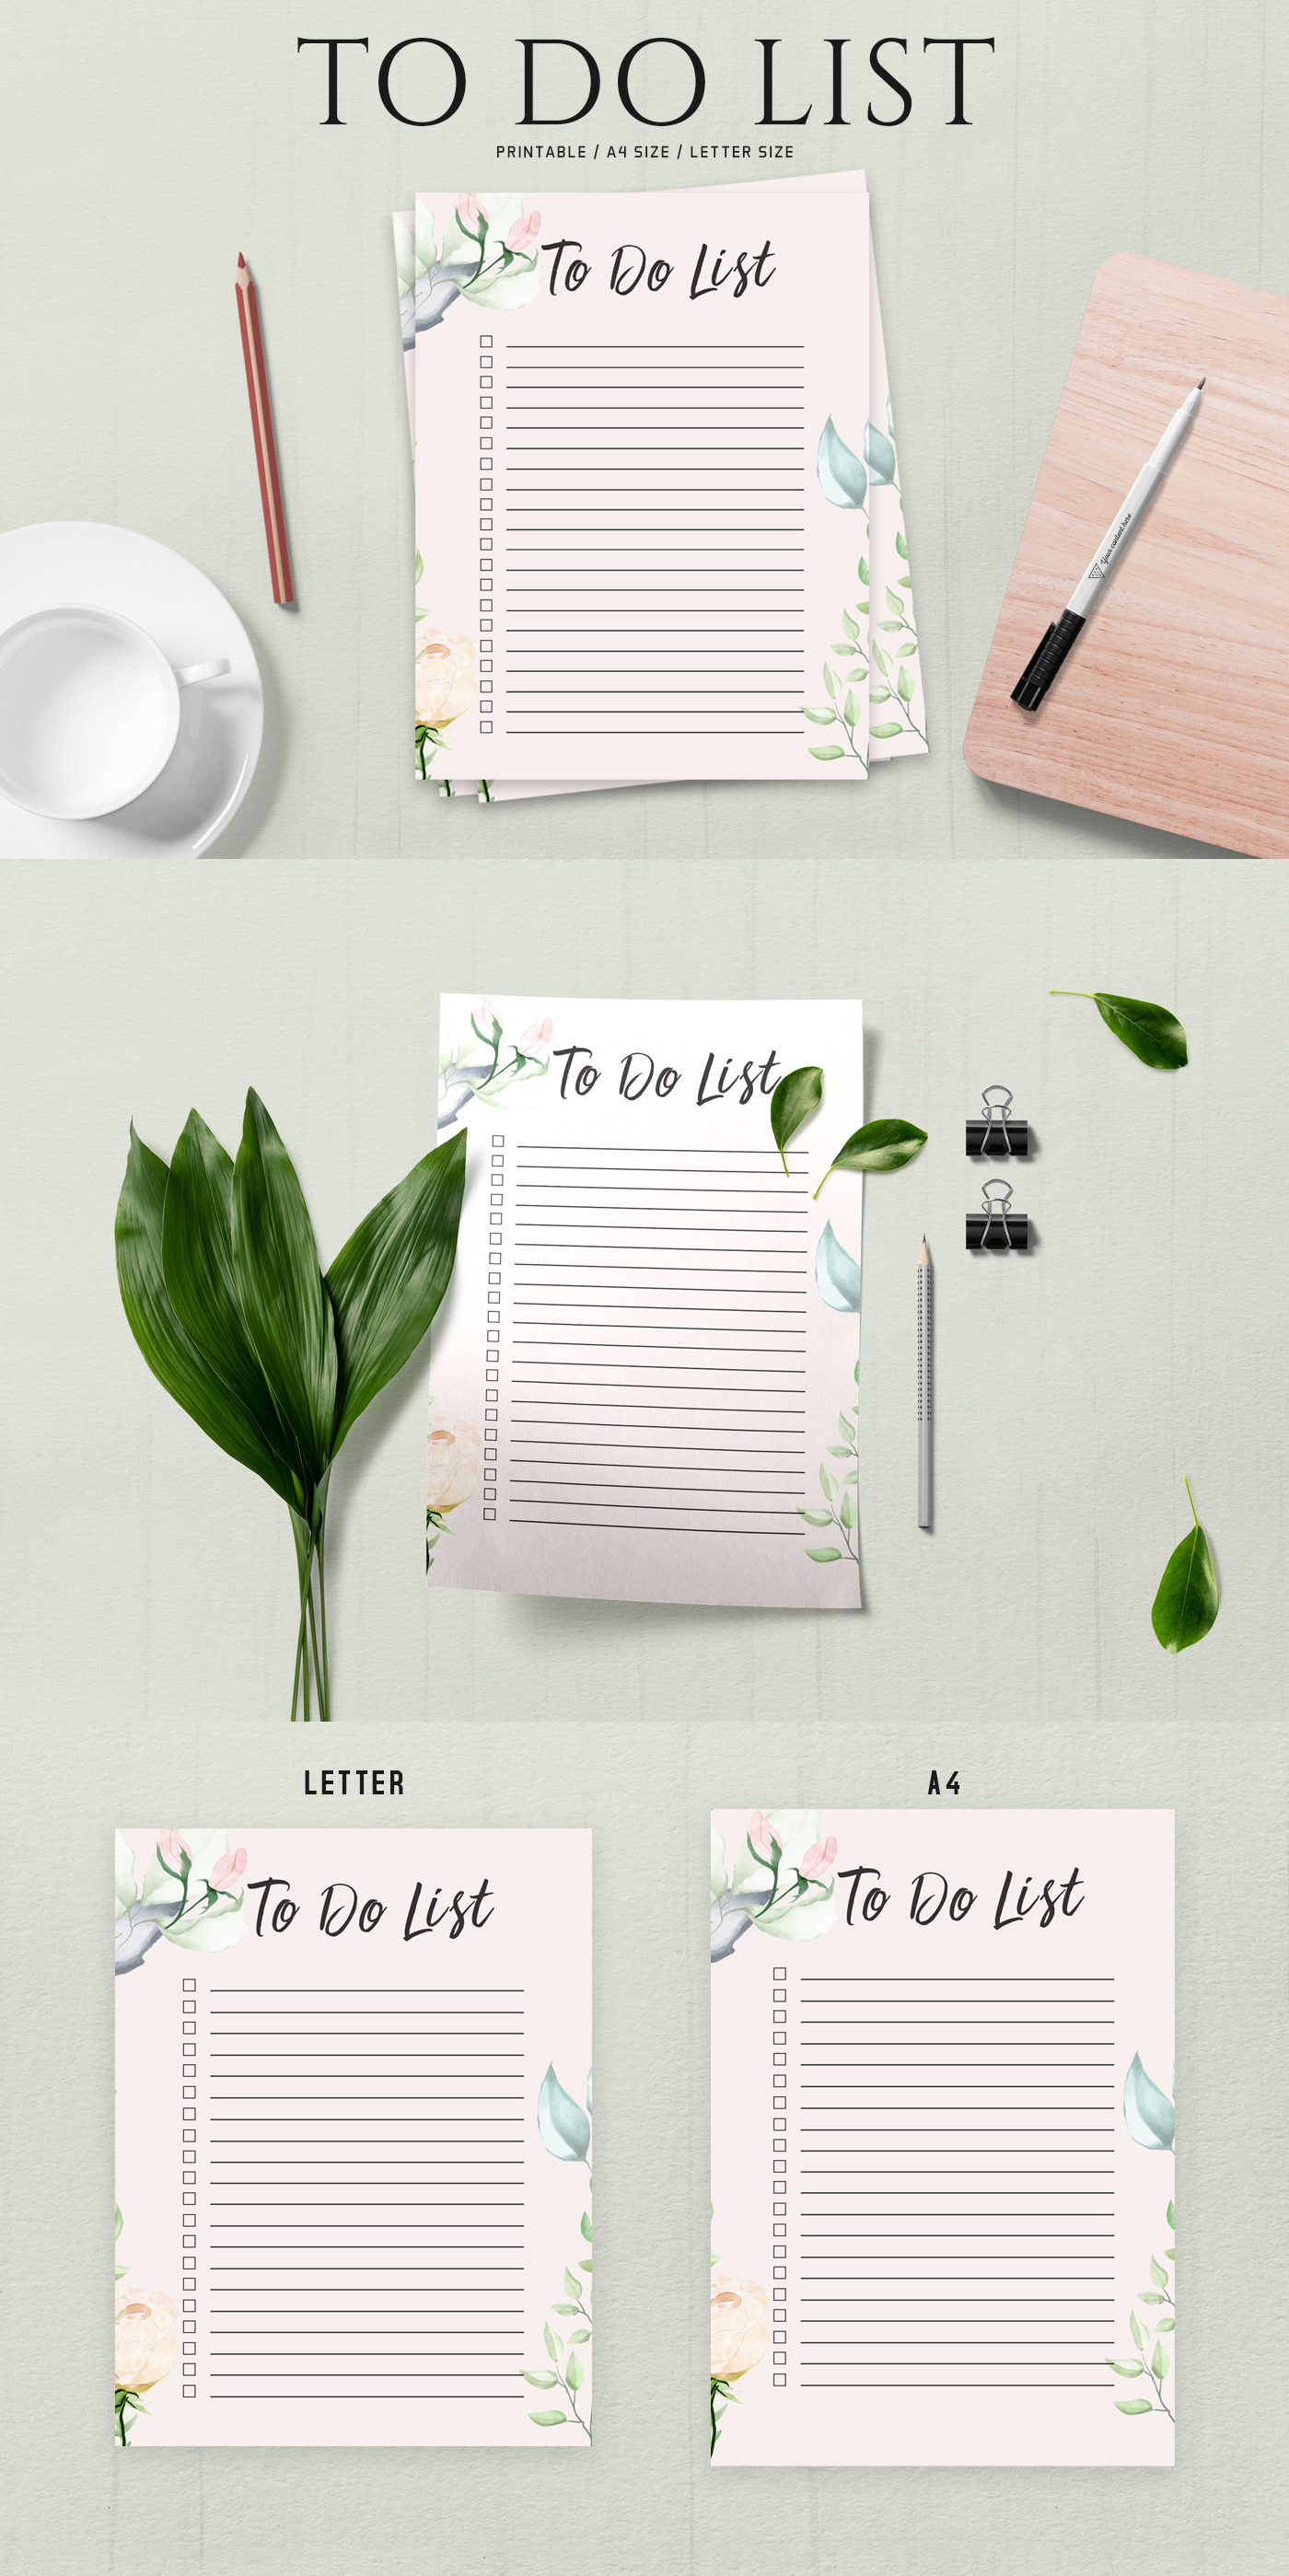 Free To Do List Printable Template is a clean and simple minimalist to do list template for you.